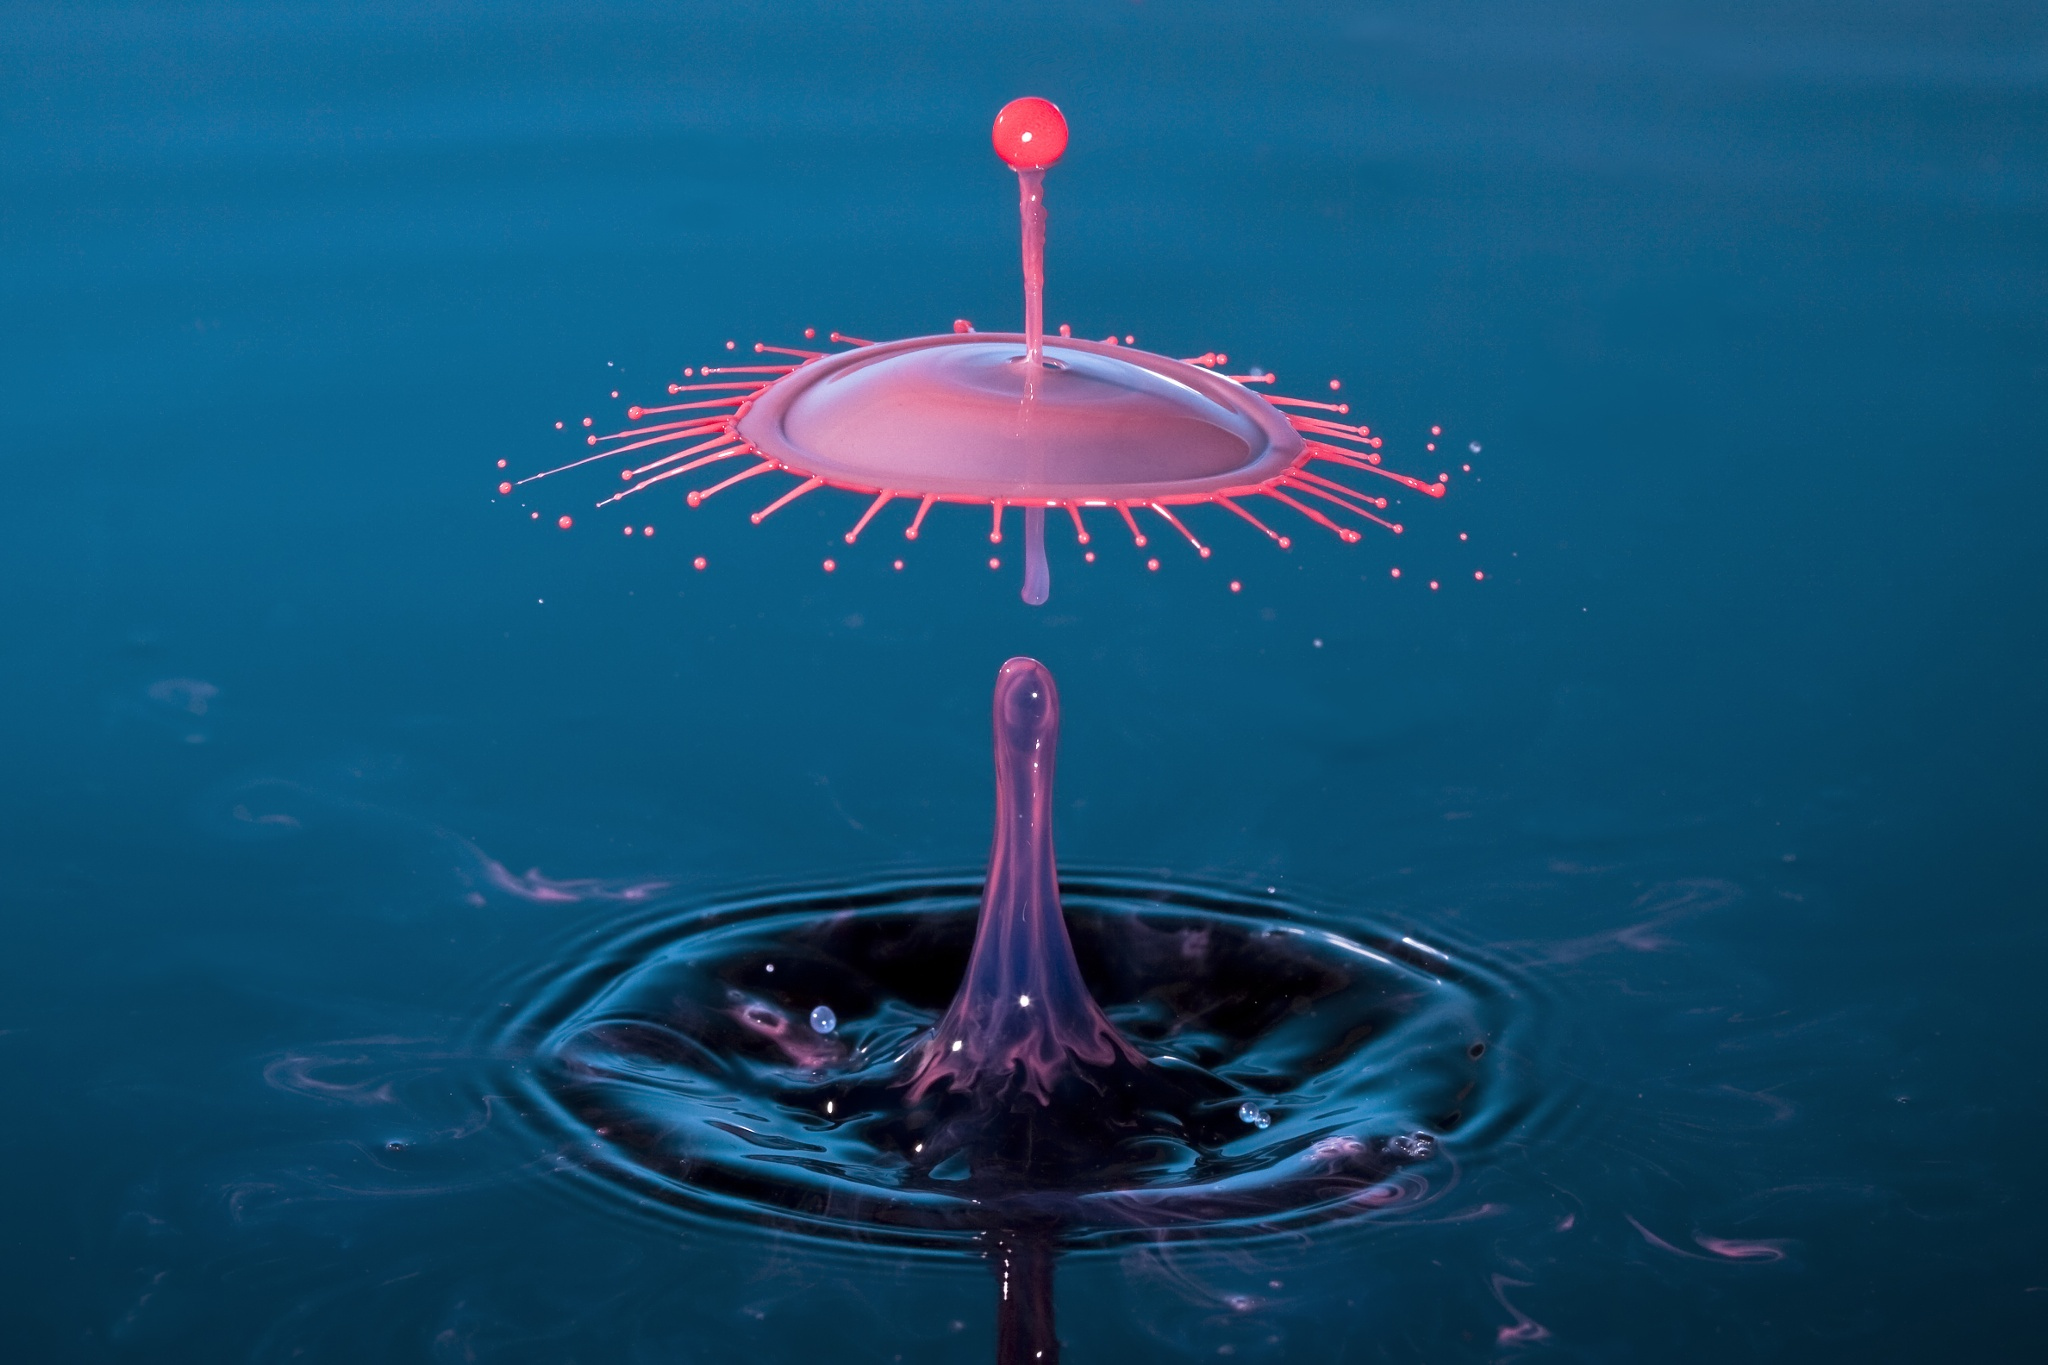 How To Get Started in Water Drop Photography